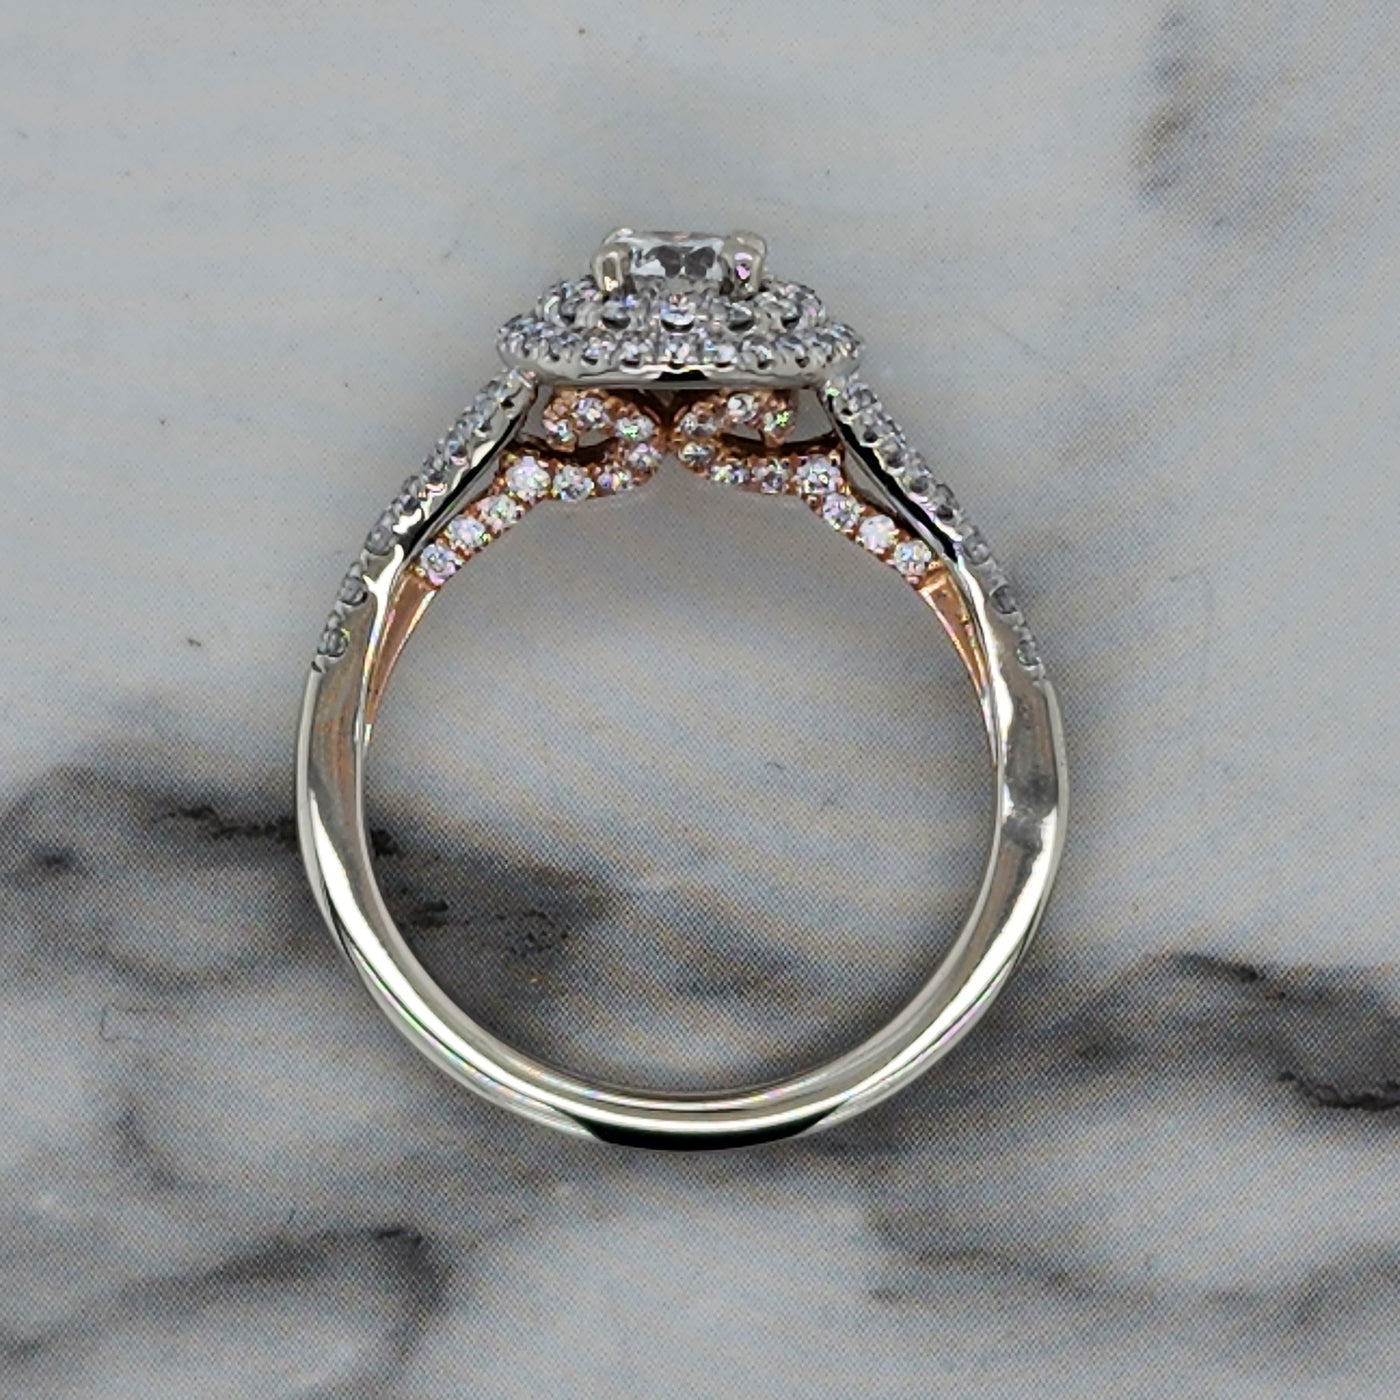 2 Tone White and Rose Gold Engagement Ring With Round Diamond and Double Halo